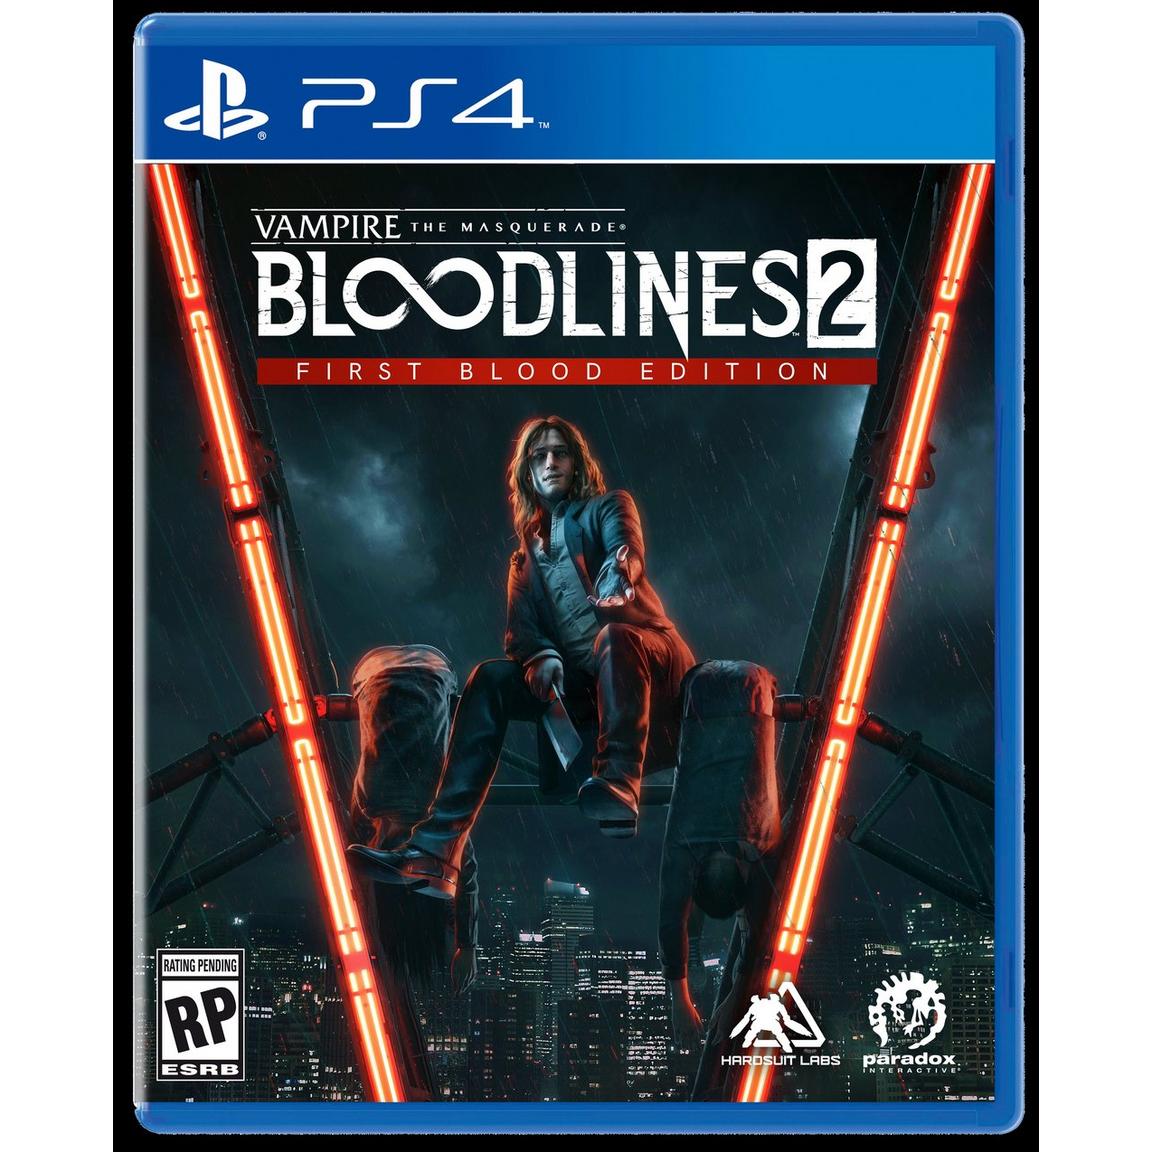 gamestop.com | Vampire: The Masquerade Bloodlines 2 First Blood Edition - PlayStation 4